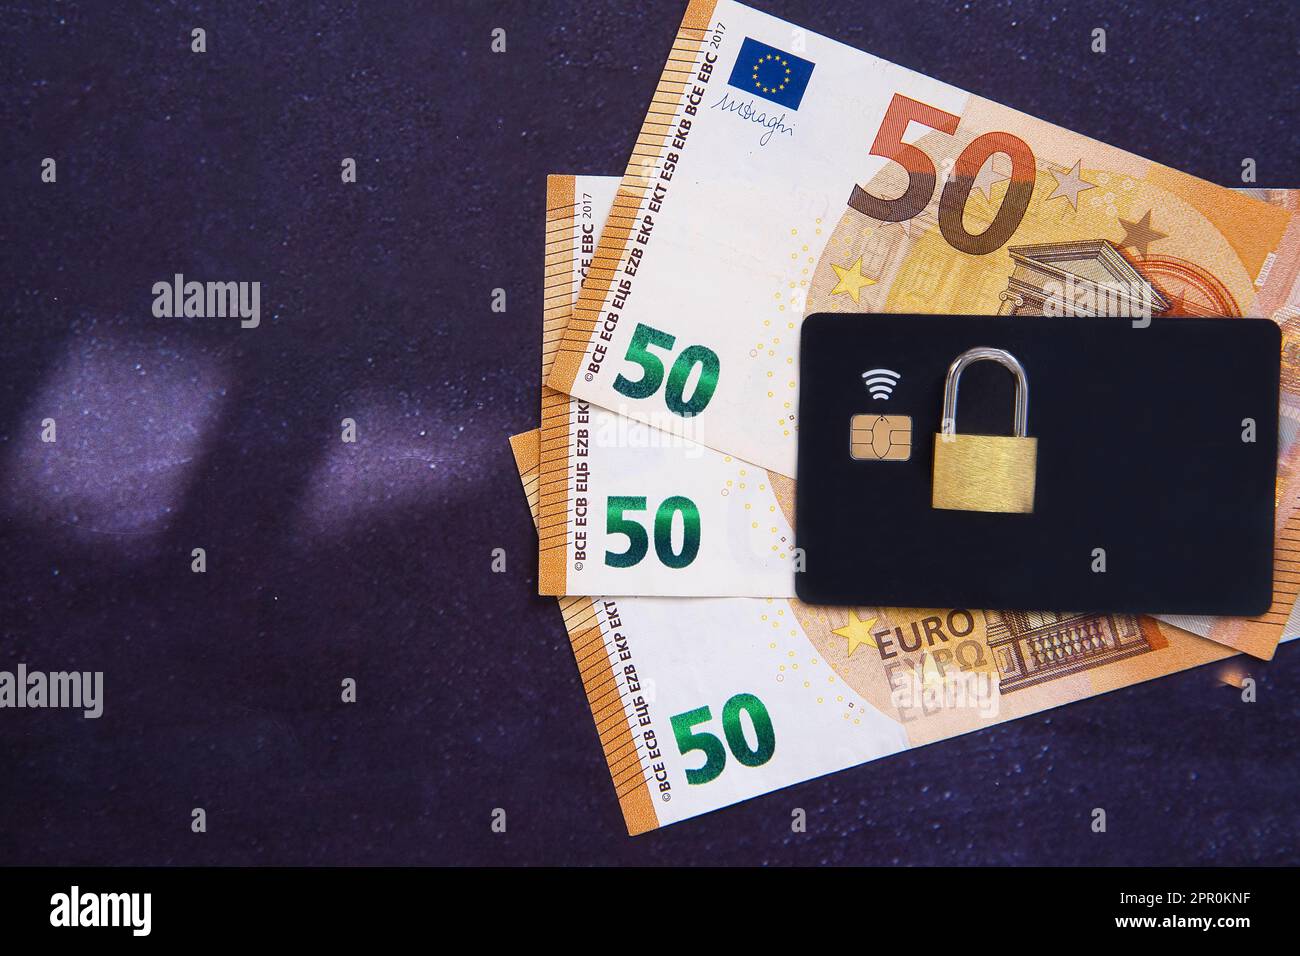 Reduction of spending and consumption due to the crisis. Padlock on money and credit card as a metaphor for blocking the consumption of products, food Stock Photo